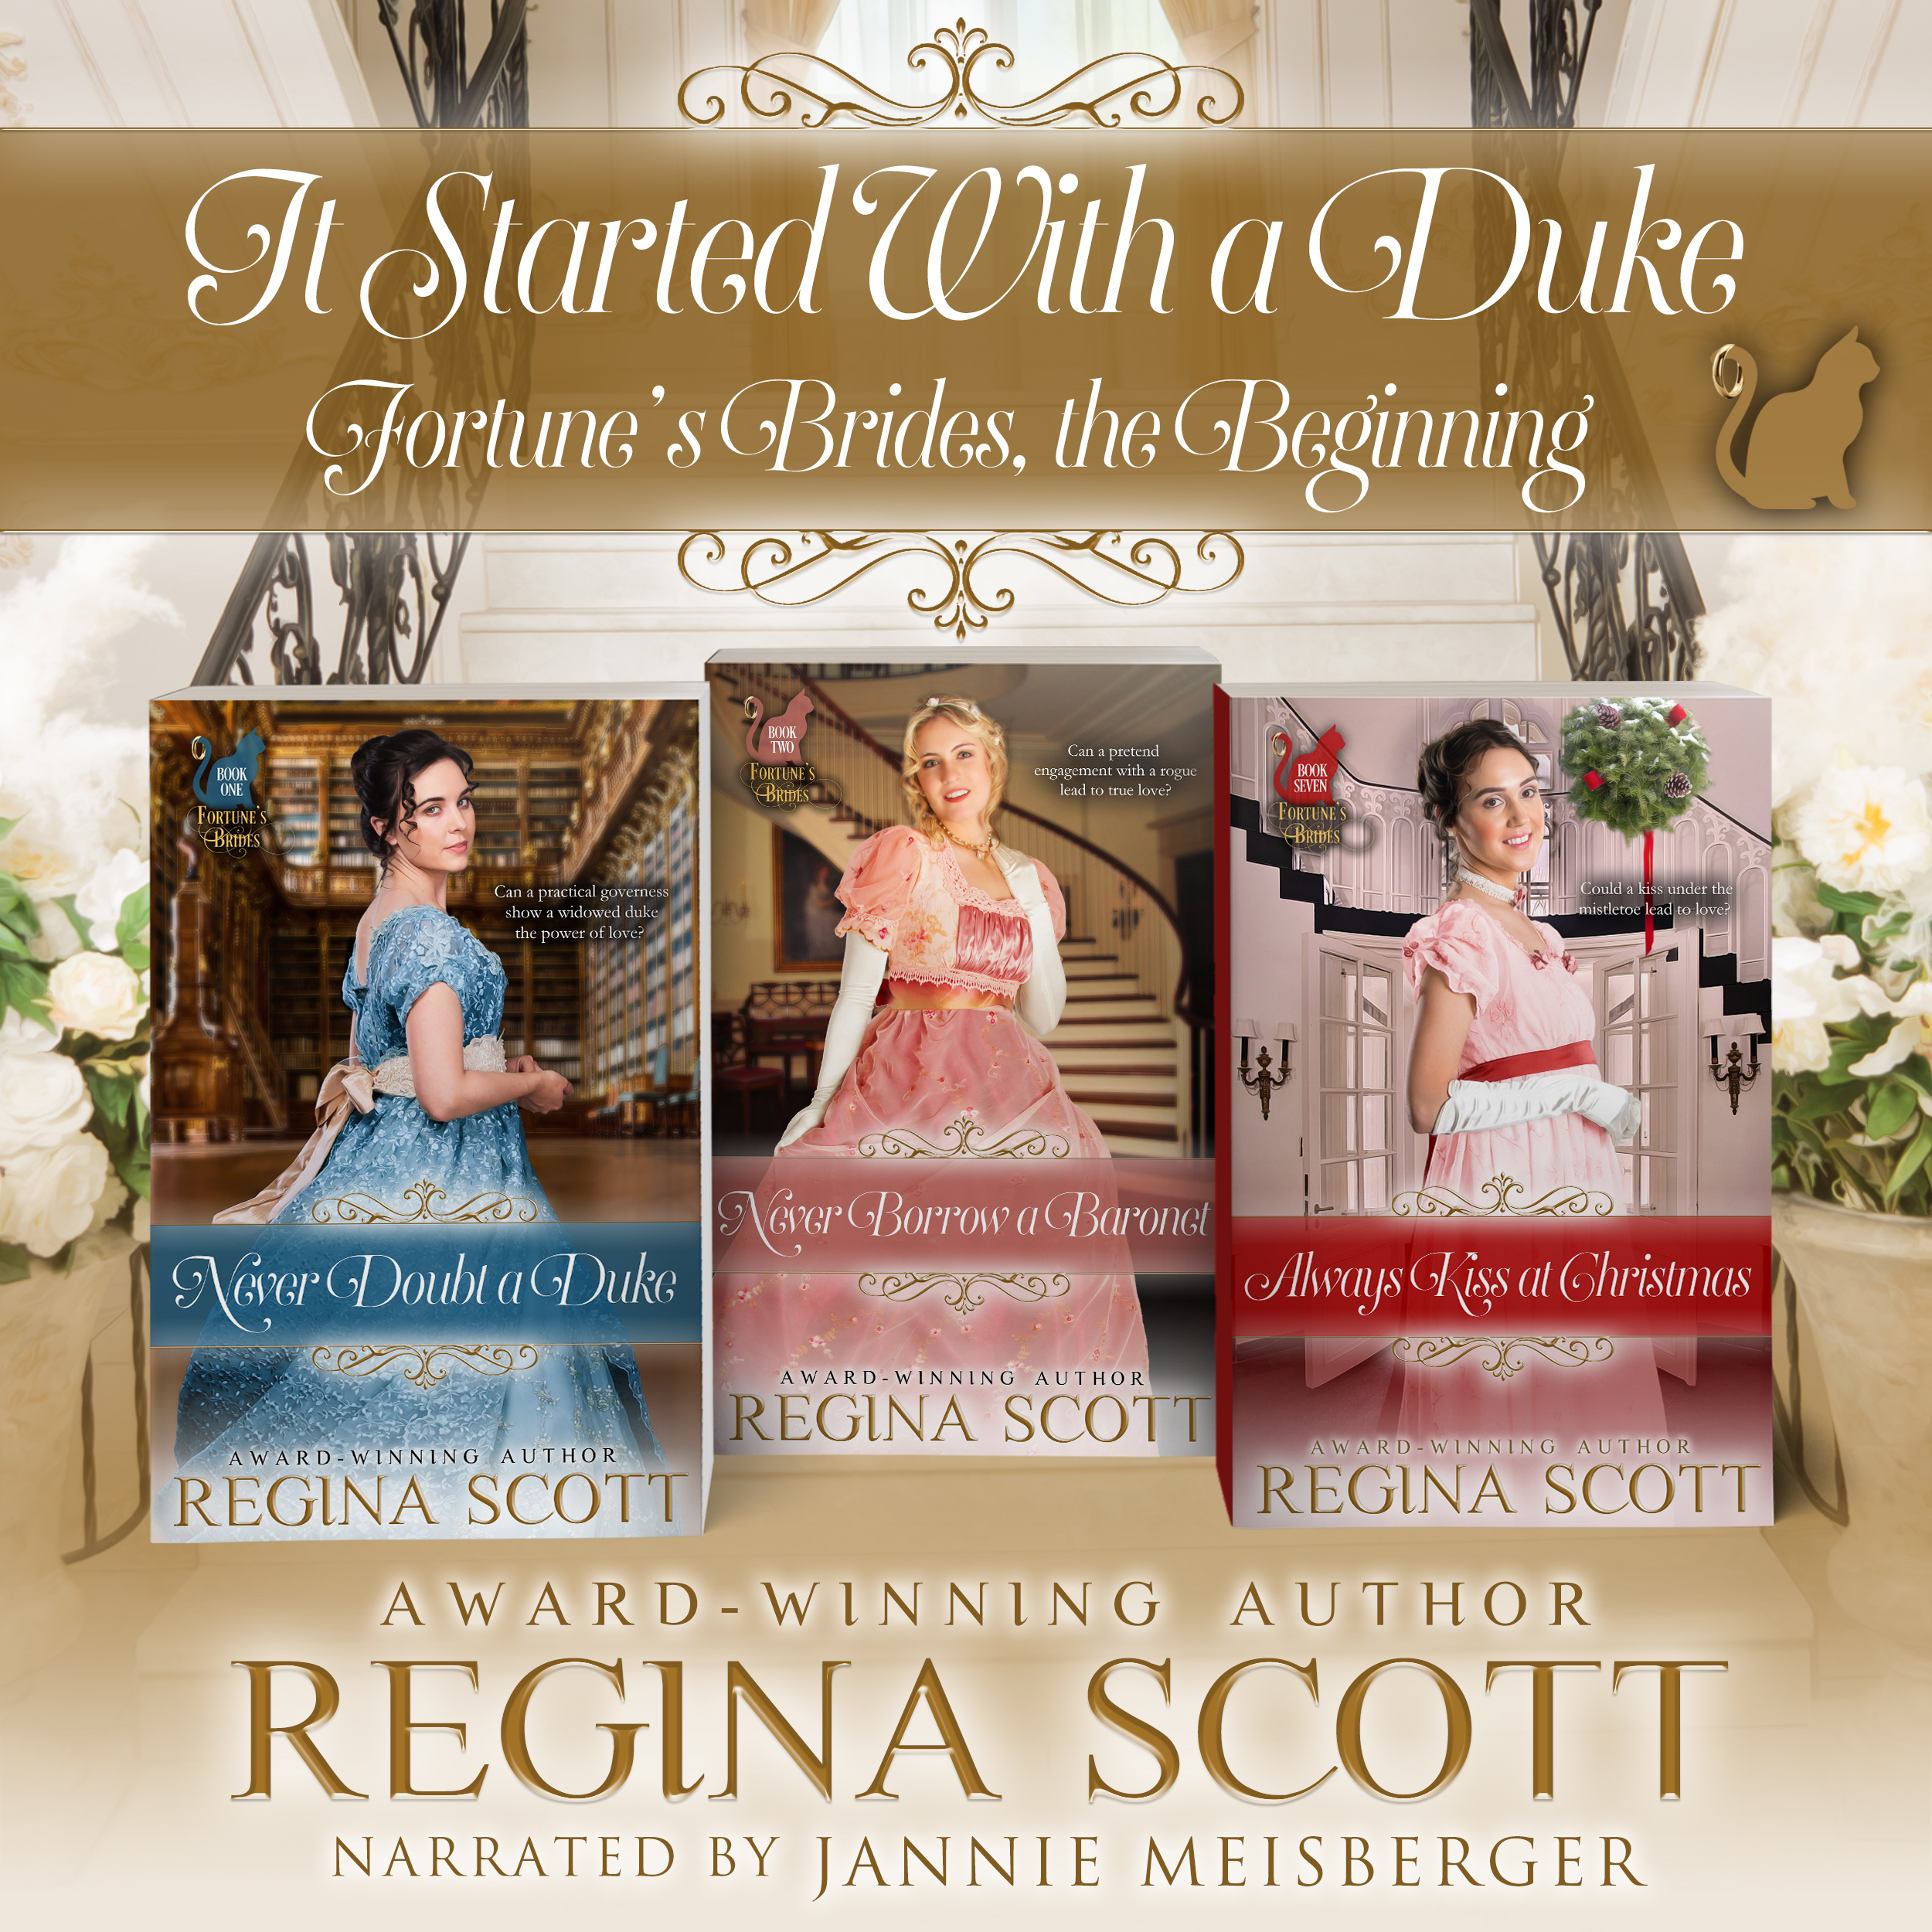 audio book for It Started With a Duke: Fortune's Brides, the Beginning, by Regina Scott